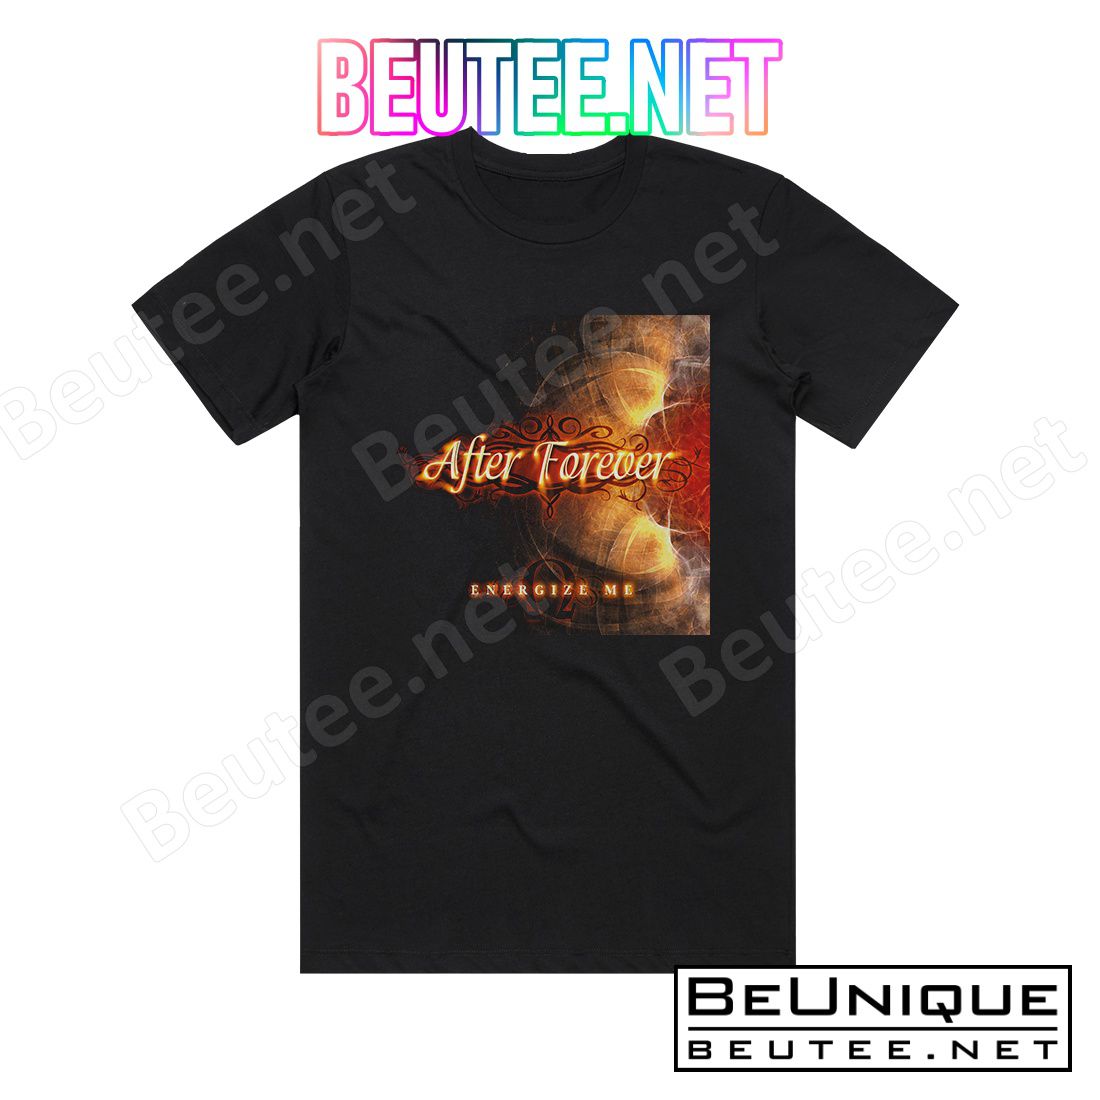 After Forever Energize Me Album Cover T-shirt